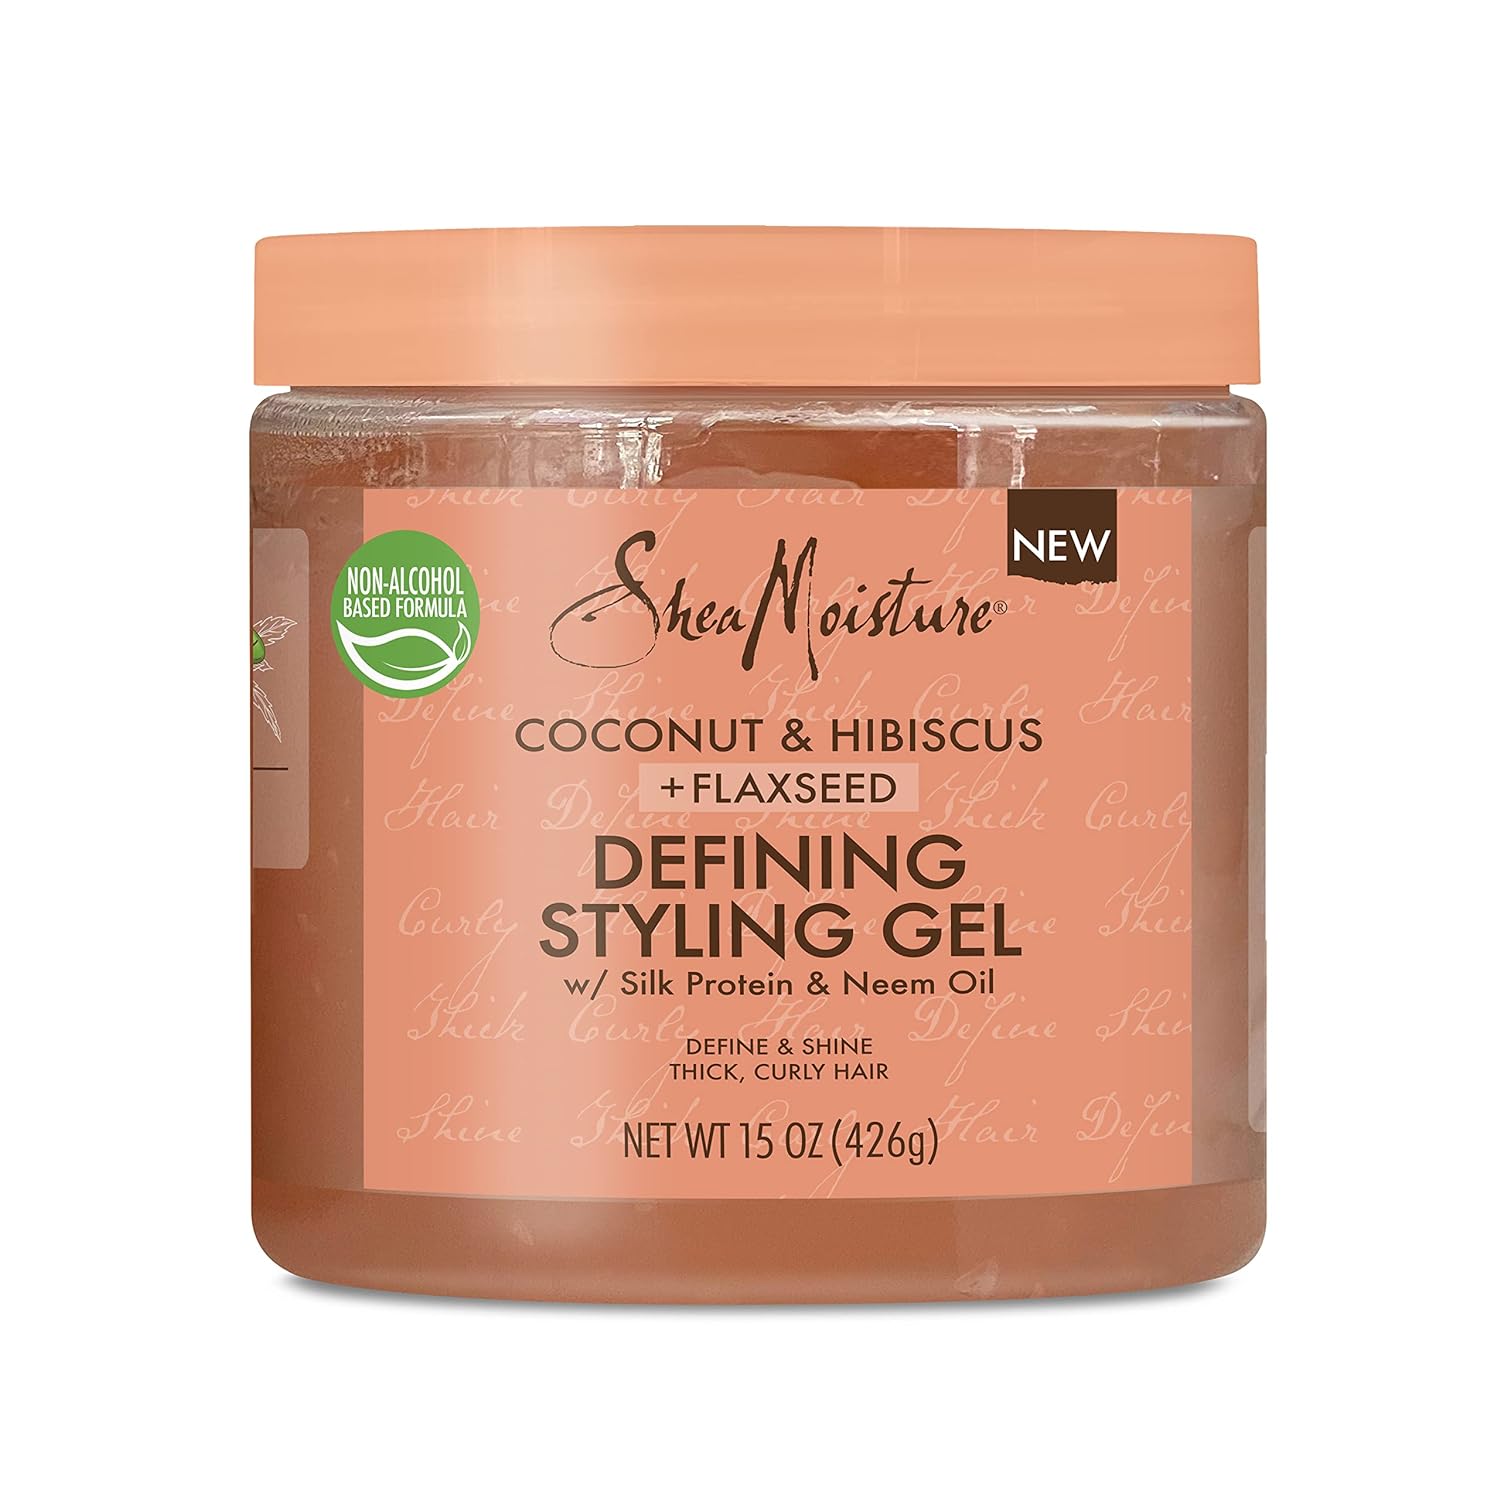 SheaMoisture Defining Styling Gel For Thick, Curly Hair Coconut & Hibiscus Paraben-Free Frizz Control Styling Gel 15 OZ, 12 count